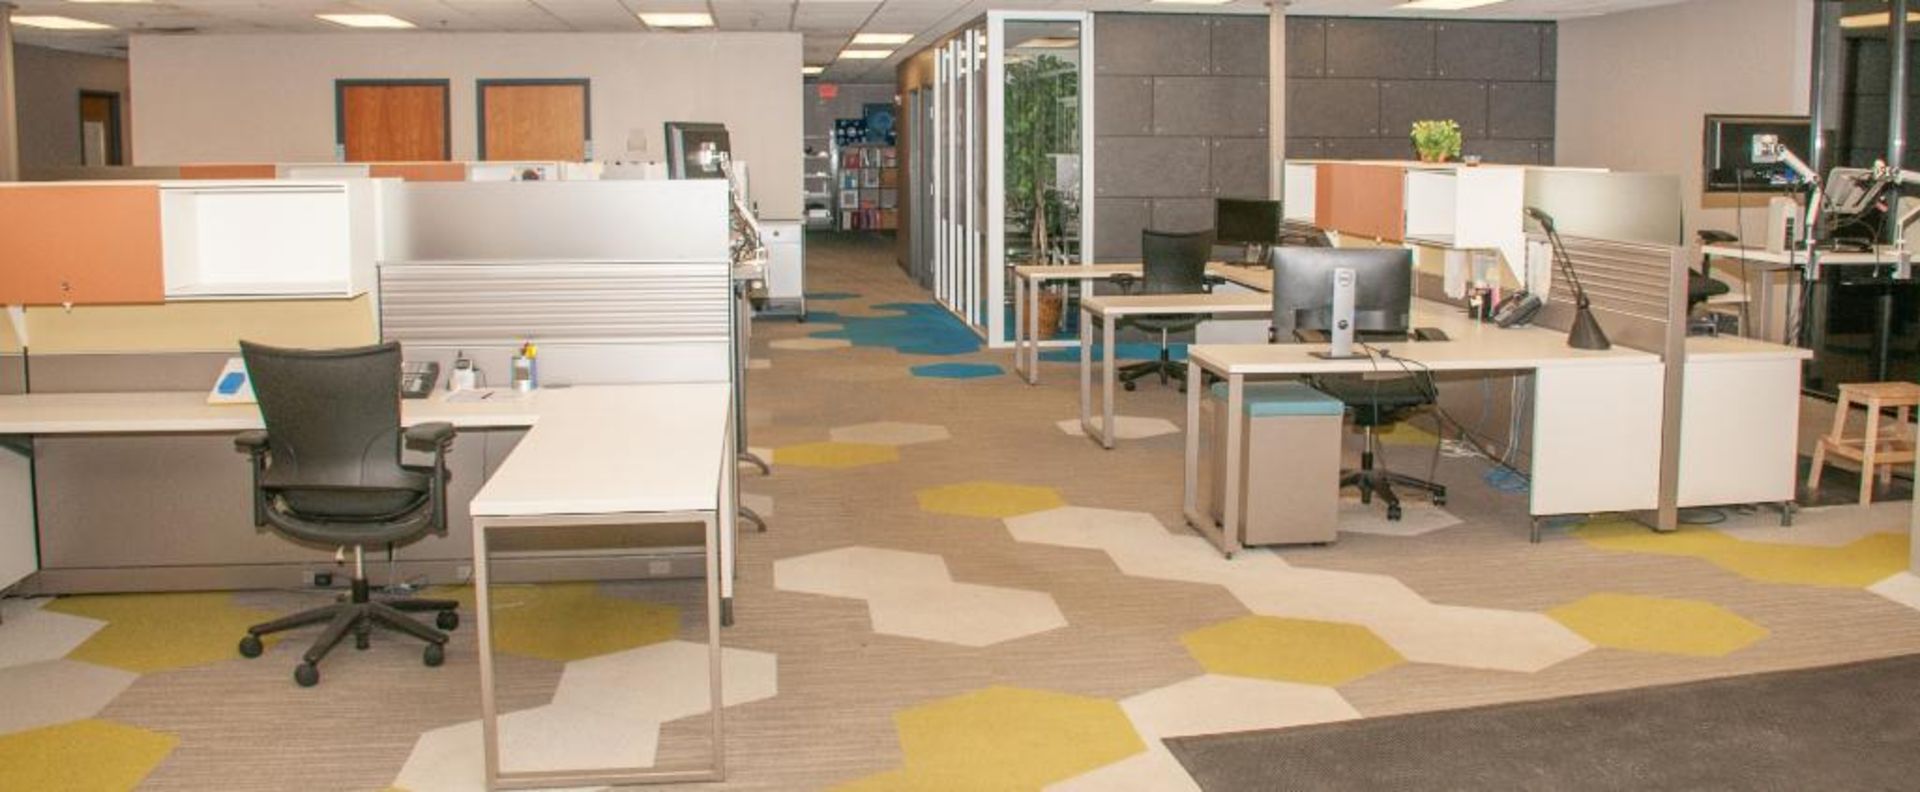 Lot c/o: Cubicles and Work Stations straight in from main entrance & right side, desks, chairs, comp - Image 2 of 7